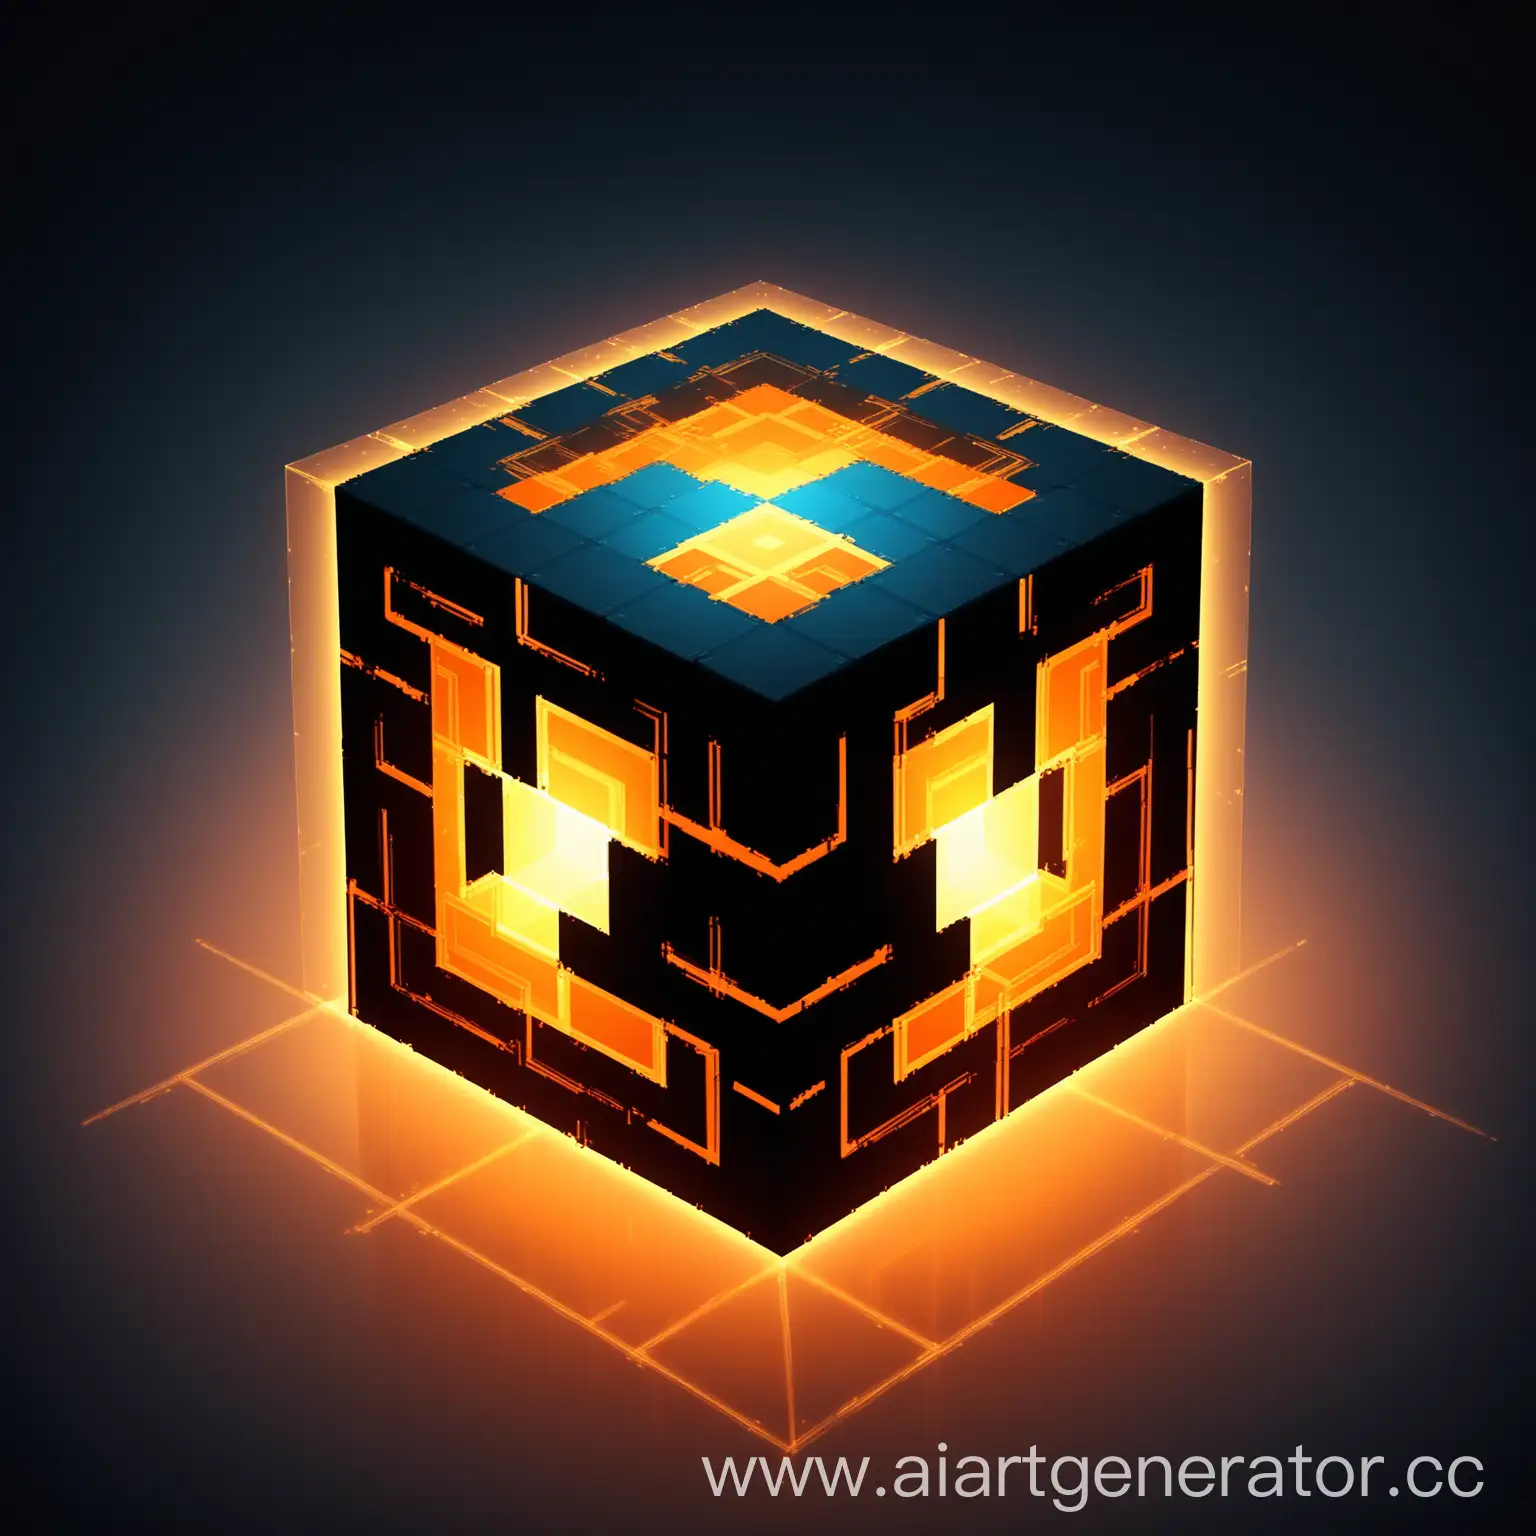 The image presents a cube designed in the iconic style of Minecraft, characterized by its geometric simplicity and block-like structure. However, this cube is unique in that it does not have any solid fills or textures. Instead, its form is defined by glowing lines that delineate the edges, creating an intricate and luminous visual.

The glowing lines form a gradient that transitions smoothly from a rich golden yellow at the lower edges to a vibrant orange at the upper edges. This gradual shift in color creates a warm and inviting visual effect, suggesting that the cube is illuminated from within. The orange hues at the top hint at a more intense source of light or energy, while the golden yellow at the base suggests a softer, glowing radiance.

Since there is no background in the image, the cube appears to be floating freely in a transparent space. This absence of a background emphasizes the cube's luminous edges and adds a futuristic and abstract quality to the design. The floating effect contributes to a sense of depth and space, making it easy to imagine the cube as part of a larger digital or conceptual environment.

The combination of the glowing gradient and the geometric simplicity of the cube creates a striking visual contrast. The transition from yellow to orange implies warmth, energy, and motion, reinforcing the idea that the cube is emanating light. This dynamic appearance can evoke a sense of technology, innovation, or otherworldly realms, making the image suitable for themes related to gaming, technology, and creative design.

Overall, the glowing gradient from golden yellow to vibrant orange, along with the absence of a background, offers a sense of mystery and potential, suggesting that the cube is a key to unlocking a new world or dimension, ready to be explored and utilized in a variety of imaginative contexts.